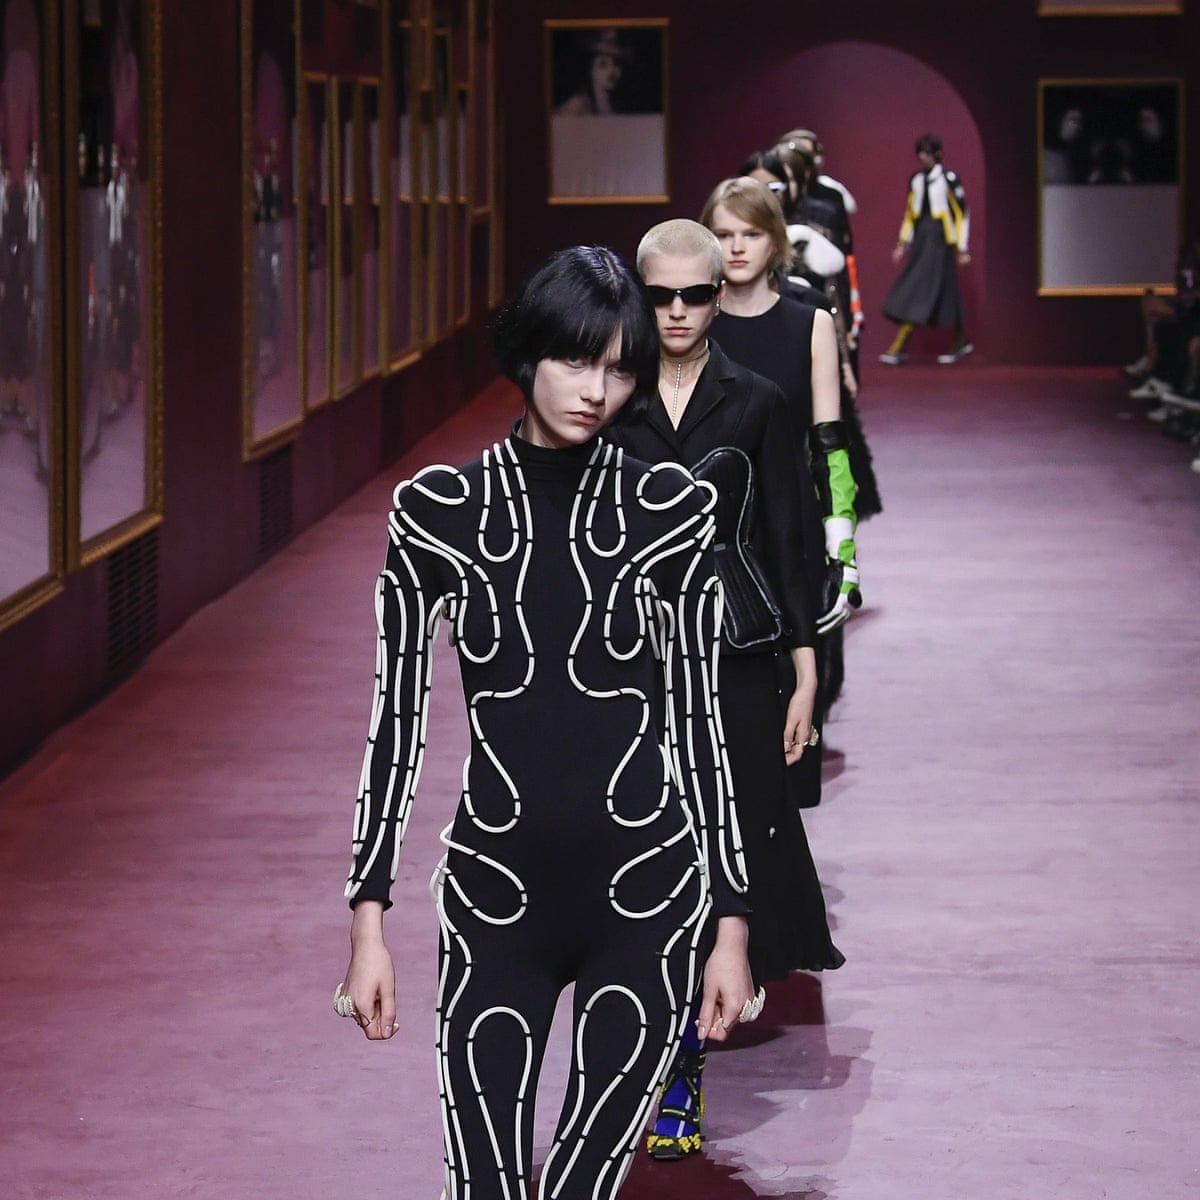 Bediende hoekpunt Persoonlijk Dior and Saint Laurent: an elevated discussion between past and future |  Fashion | The Guardian